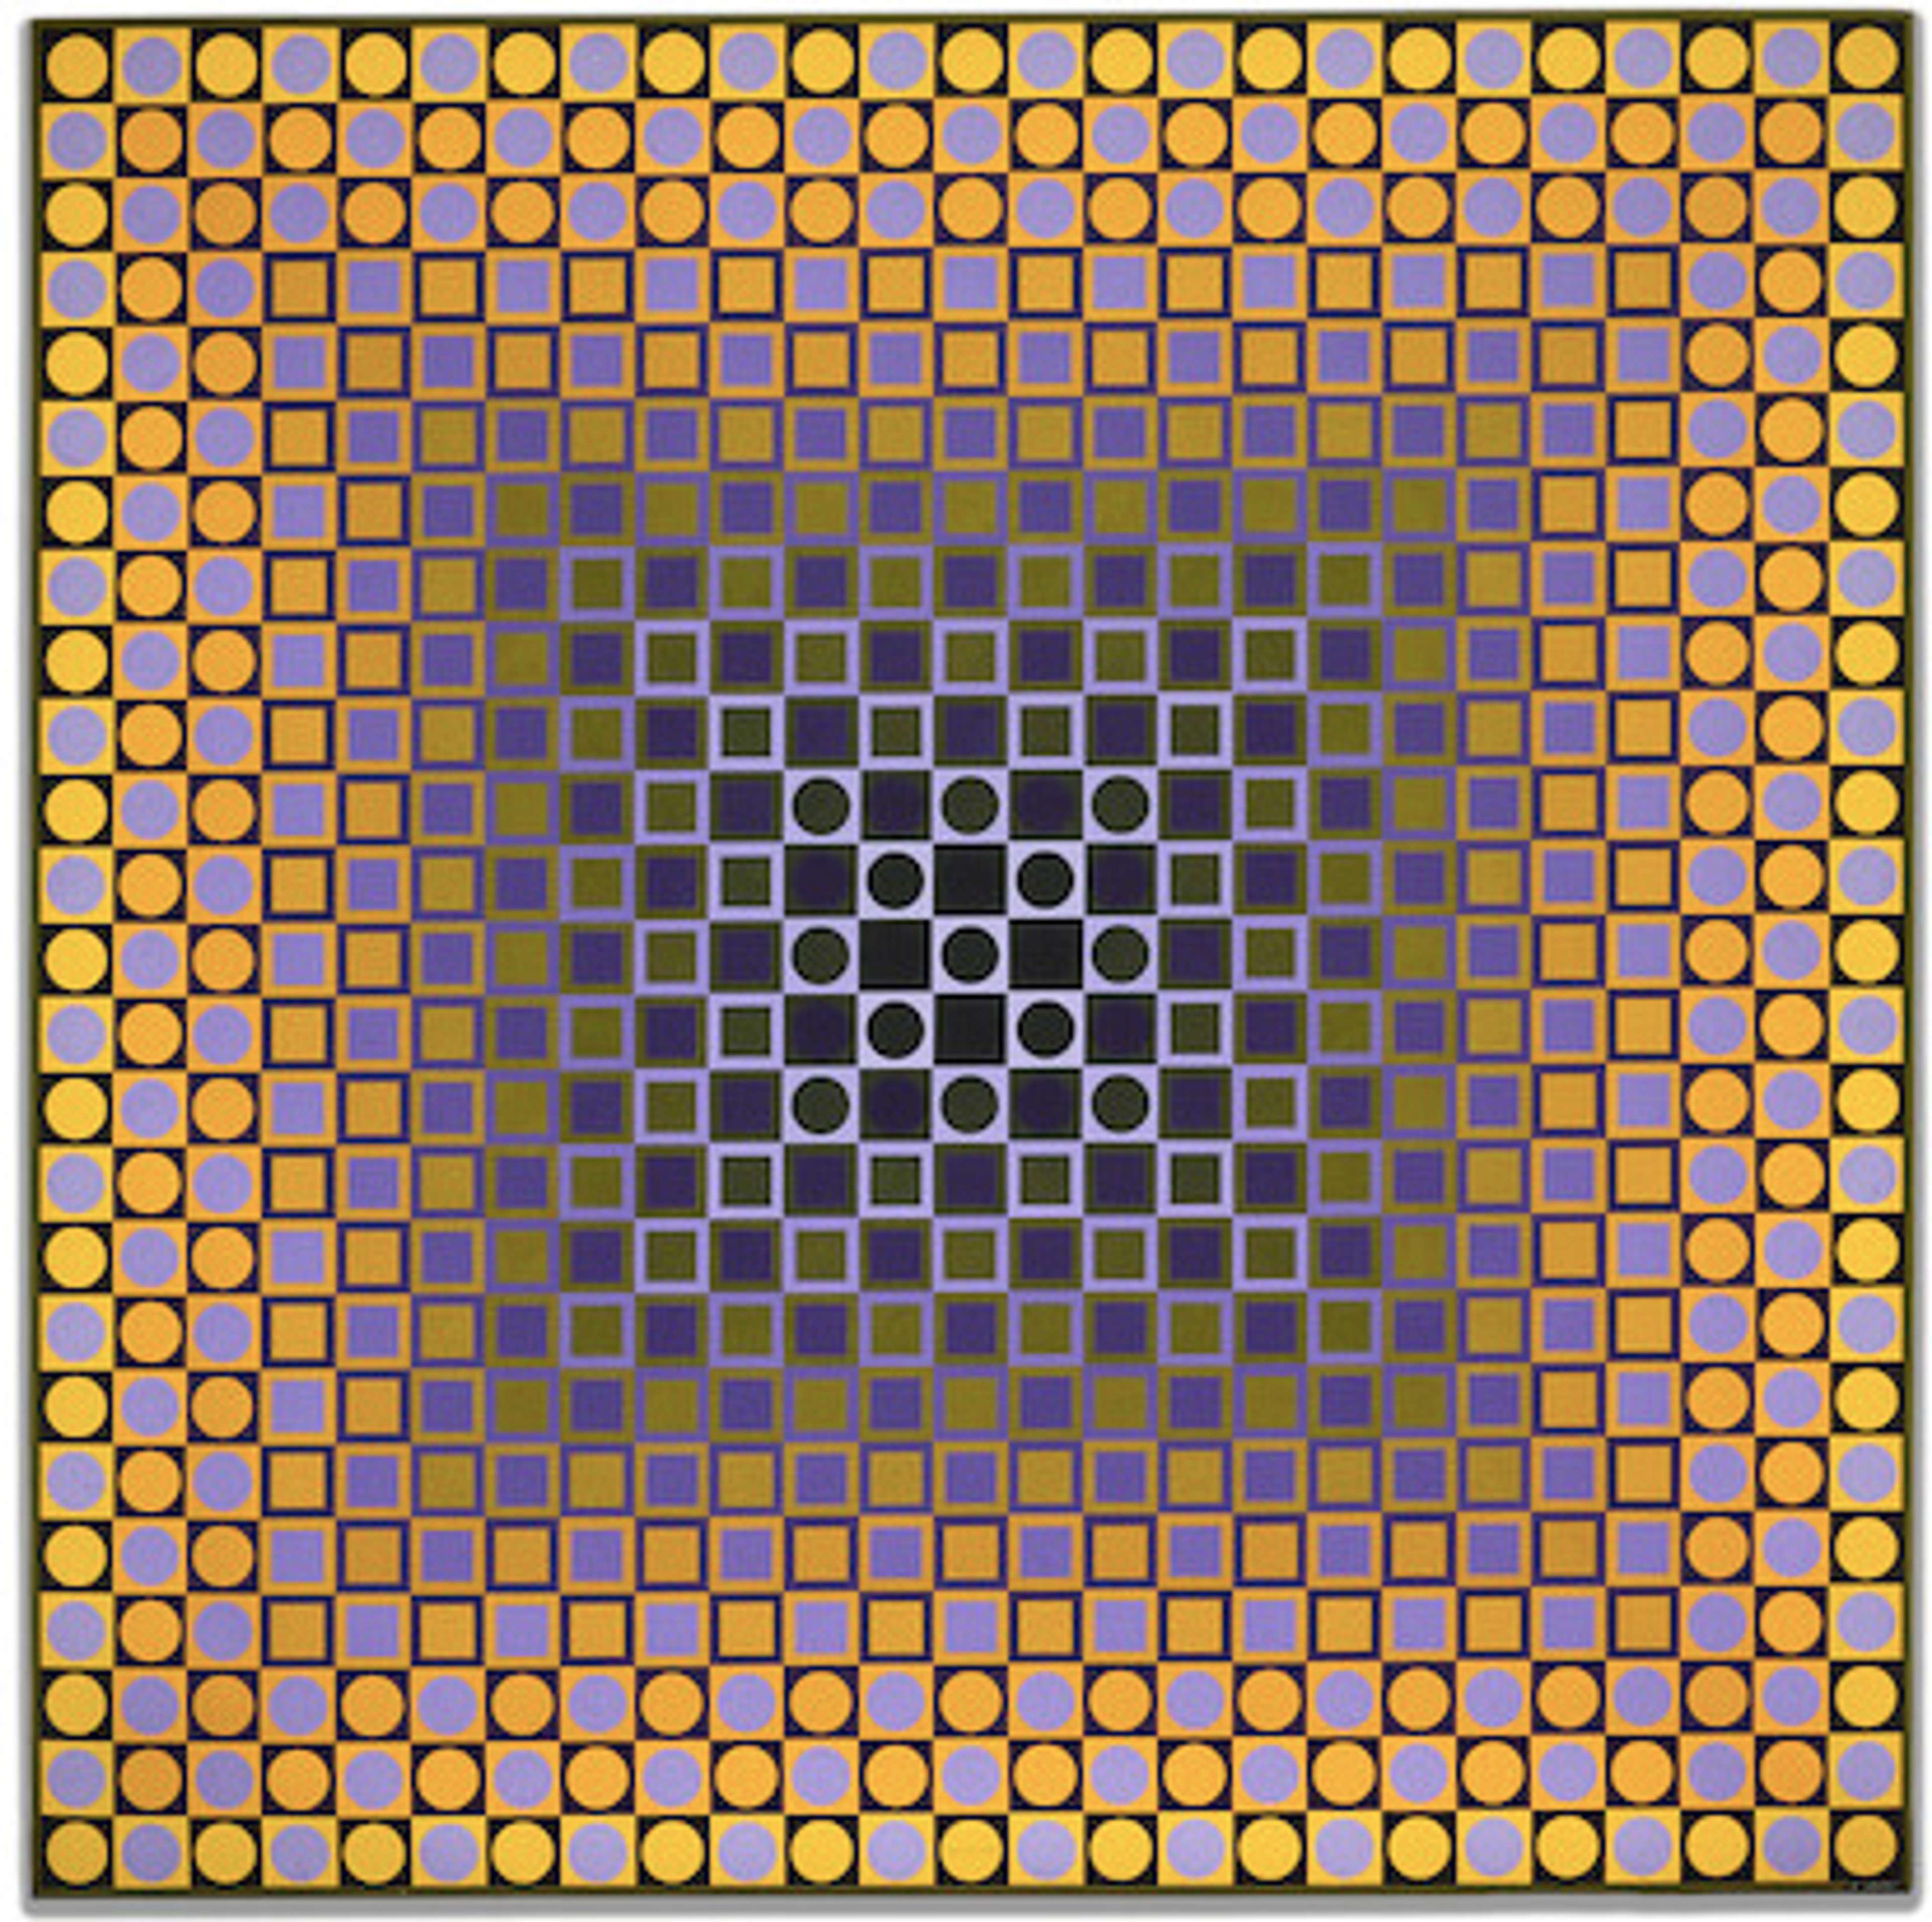  A square canvas made with varying shades of yellow and purple hues, used to fill in repeating shapes of squares and circles, creating an illusion of depth within the artwork.